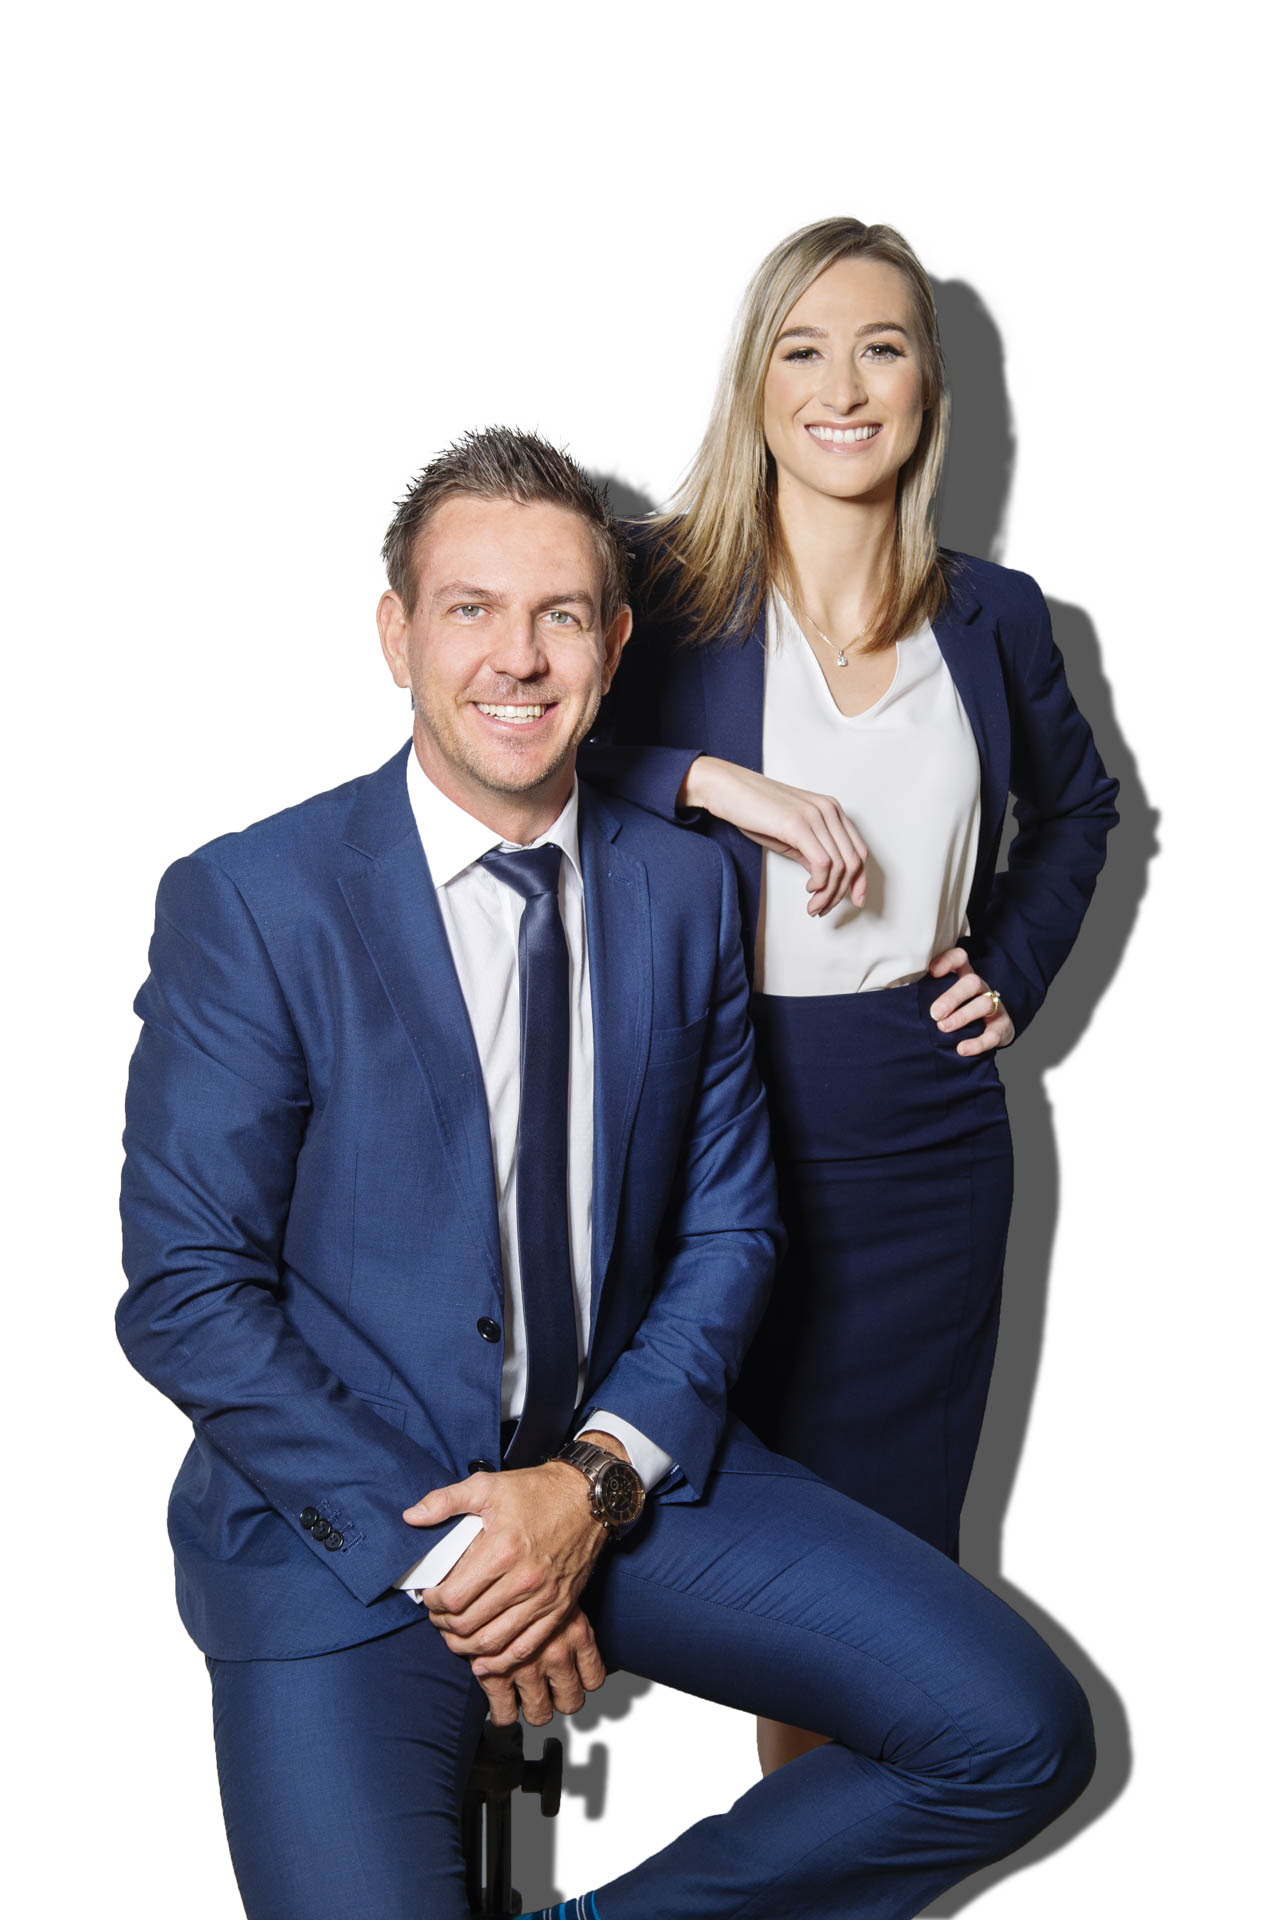 Corporate portraits of the team from Loan Market's Townsville office